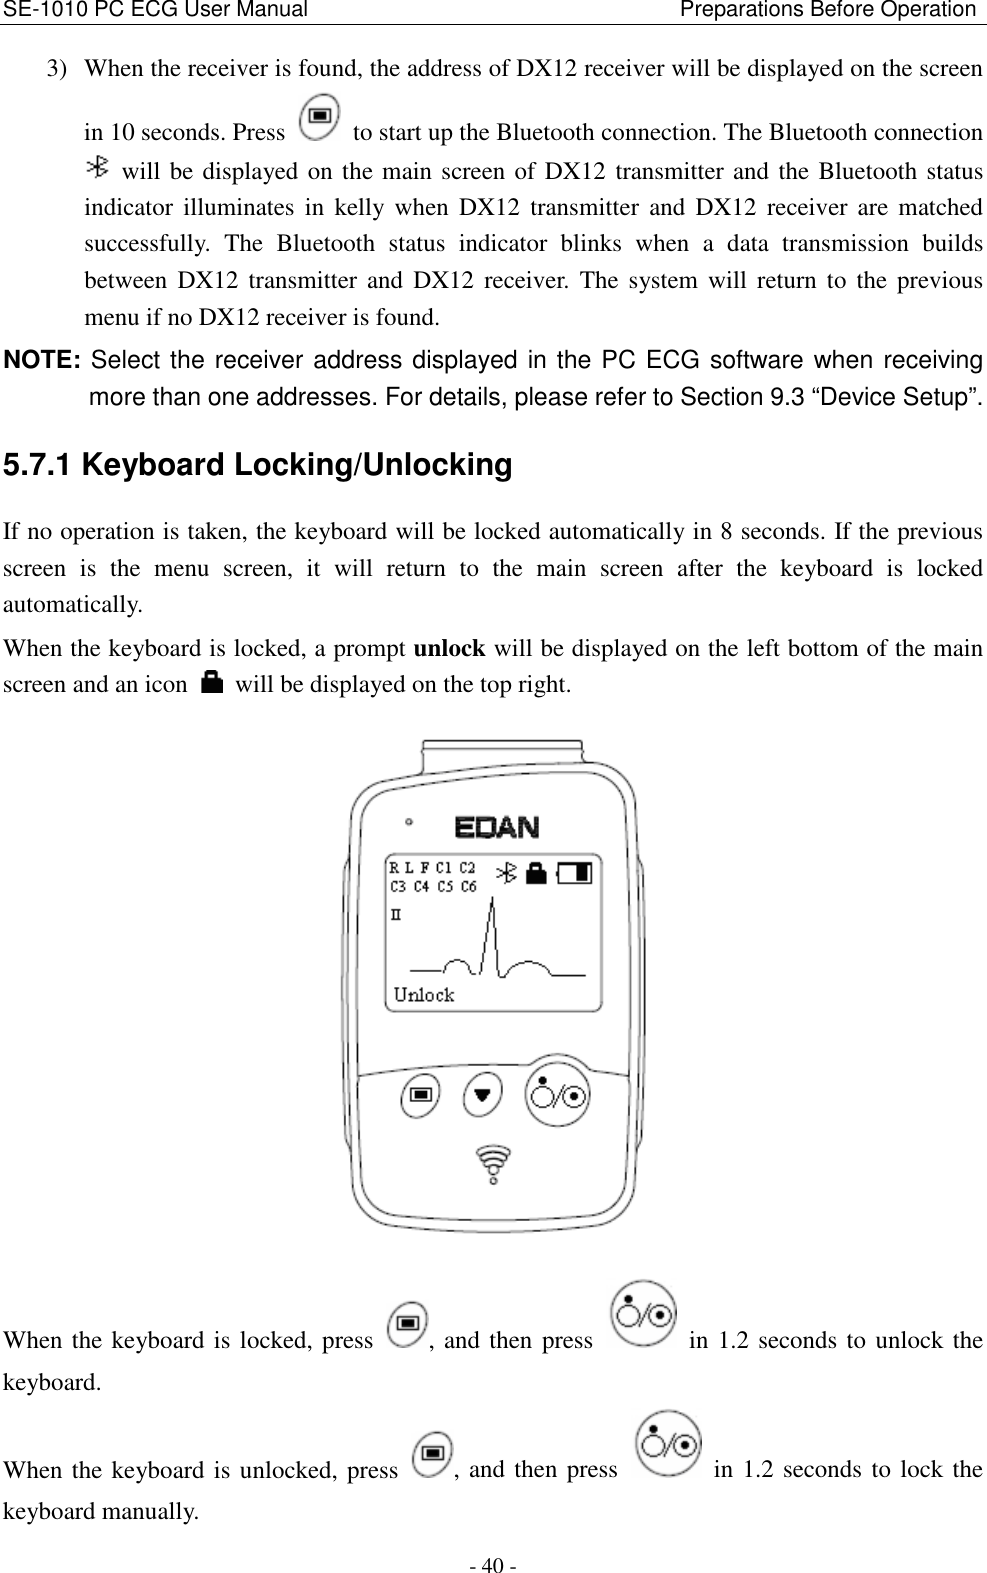 SE-1010 PC ECG User Manual                                                                    Preparations Before Operation - 40 - 3) When the receiver is found, the address of DX12 receiver will be displayed on the screen in 10 seconds. Press    to start up the Bluetooth connection. The Bluetooth connection   will be displayed on the main screen of DX12 transmitter and the Bluetooth status indicator  illuminates  in  kelly  when  DX12  transmitter  and  DX12  receiver  are  matched successfully.  The  Bluetooth  status  indicator  blinks  when  a  data  transmission  builds between DX12  transmitter and  DX12  receiver.  The  system will  return  to  the  previous menu if no DX12 receiver is found.   NOTE: Select the receiver address displayed in the PC ECG software when receiving more than one addresses. For details, please refer to Section 9.3 “Device Setup”. 5.7.1 Keyboard Locking/Unlocking   If no operation is taken, the keyboard will be locked automatically in 8 seconds. If the previous screen  is  the  menu  screen,  it  will  return  to  the  main  screen  after  the  keyboard  is  locked automatically.   When the keyboard is locked, a prompt unlock will be displayed on the left bottom of the main screen and an icon    will be displayed on the top right.    When the keyboard is locked, press  , and then press    in 1.2 seconds to unlock the keyboard.   When the keyboard is unlocked, press  , and then press    in 1.2 seconds to lock the keyboard manually.   